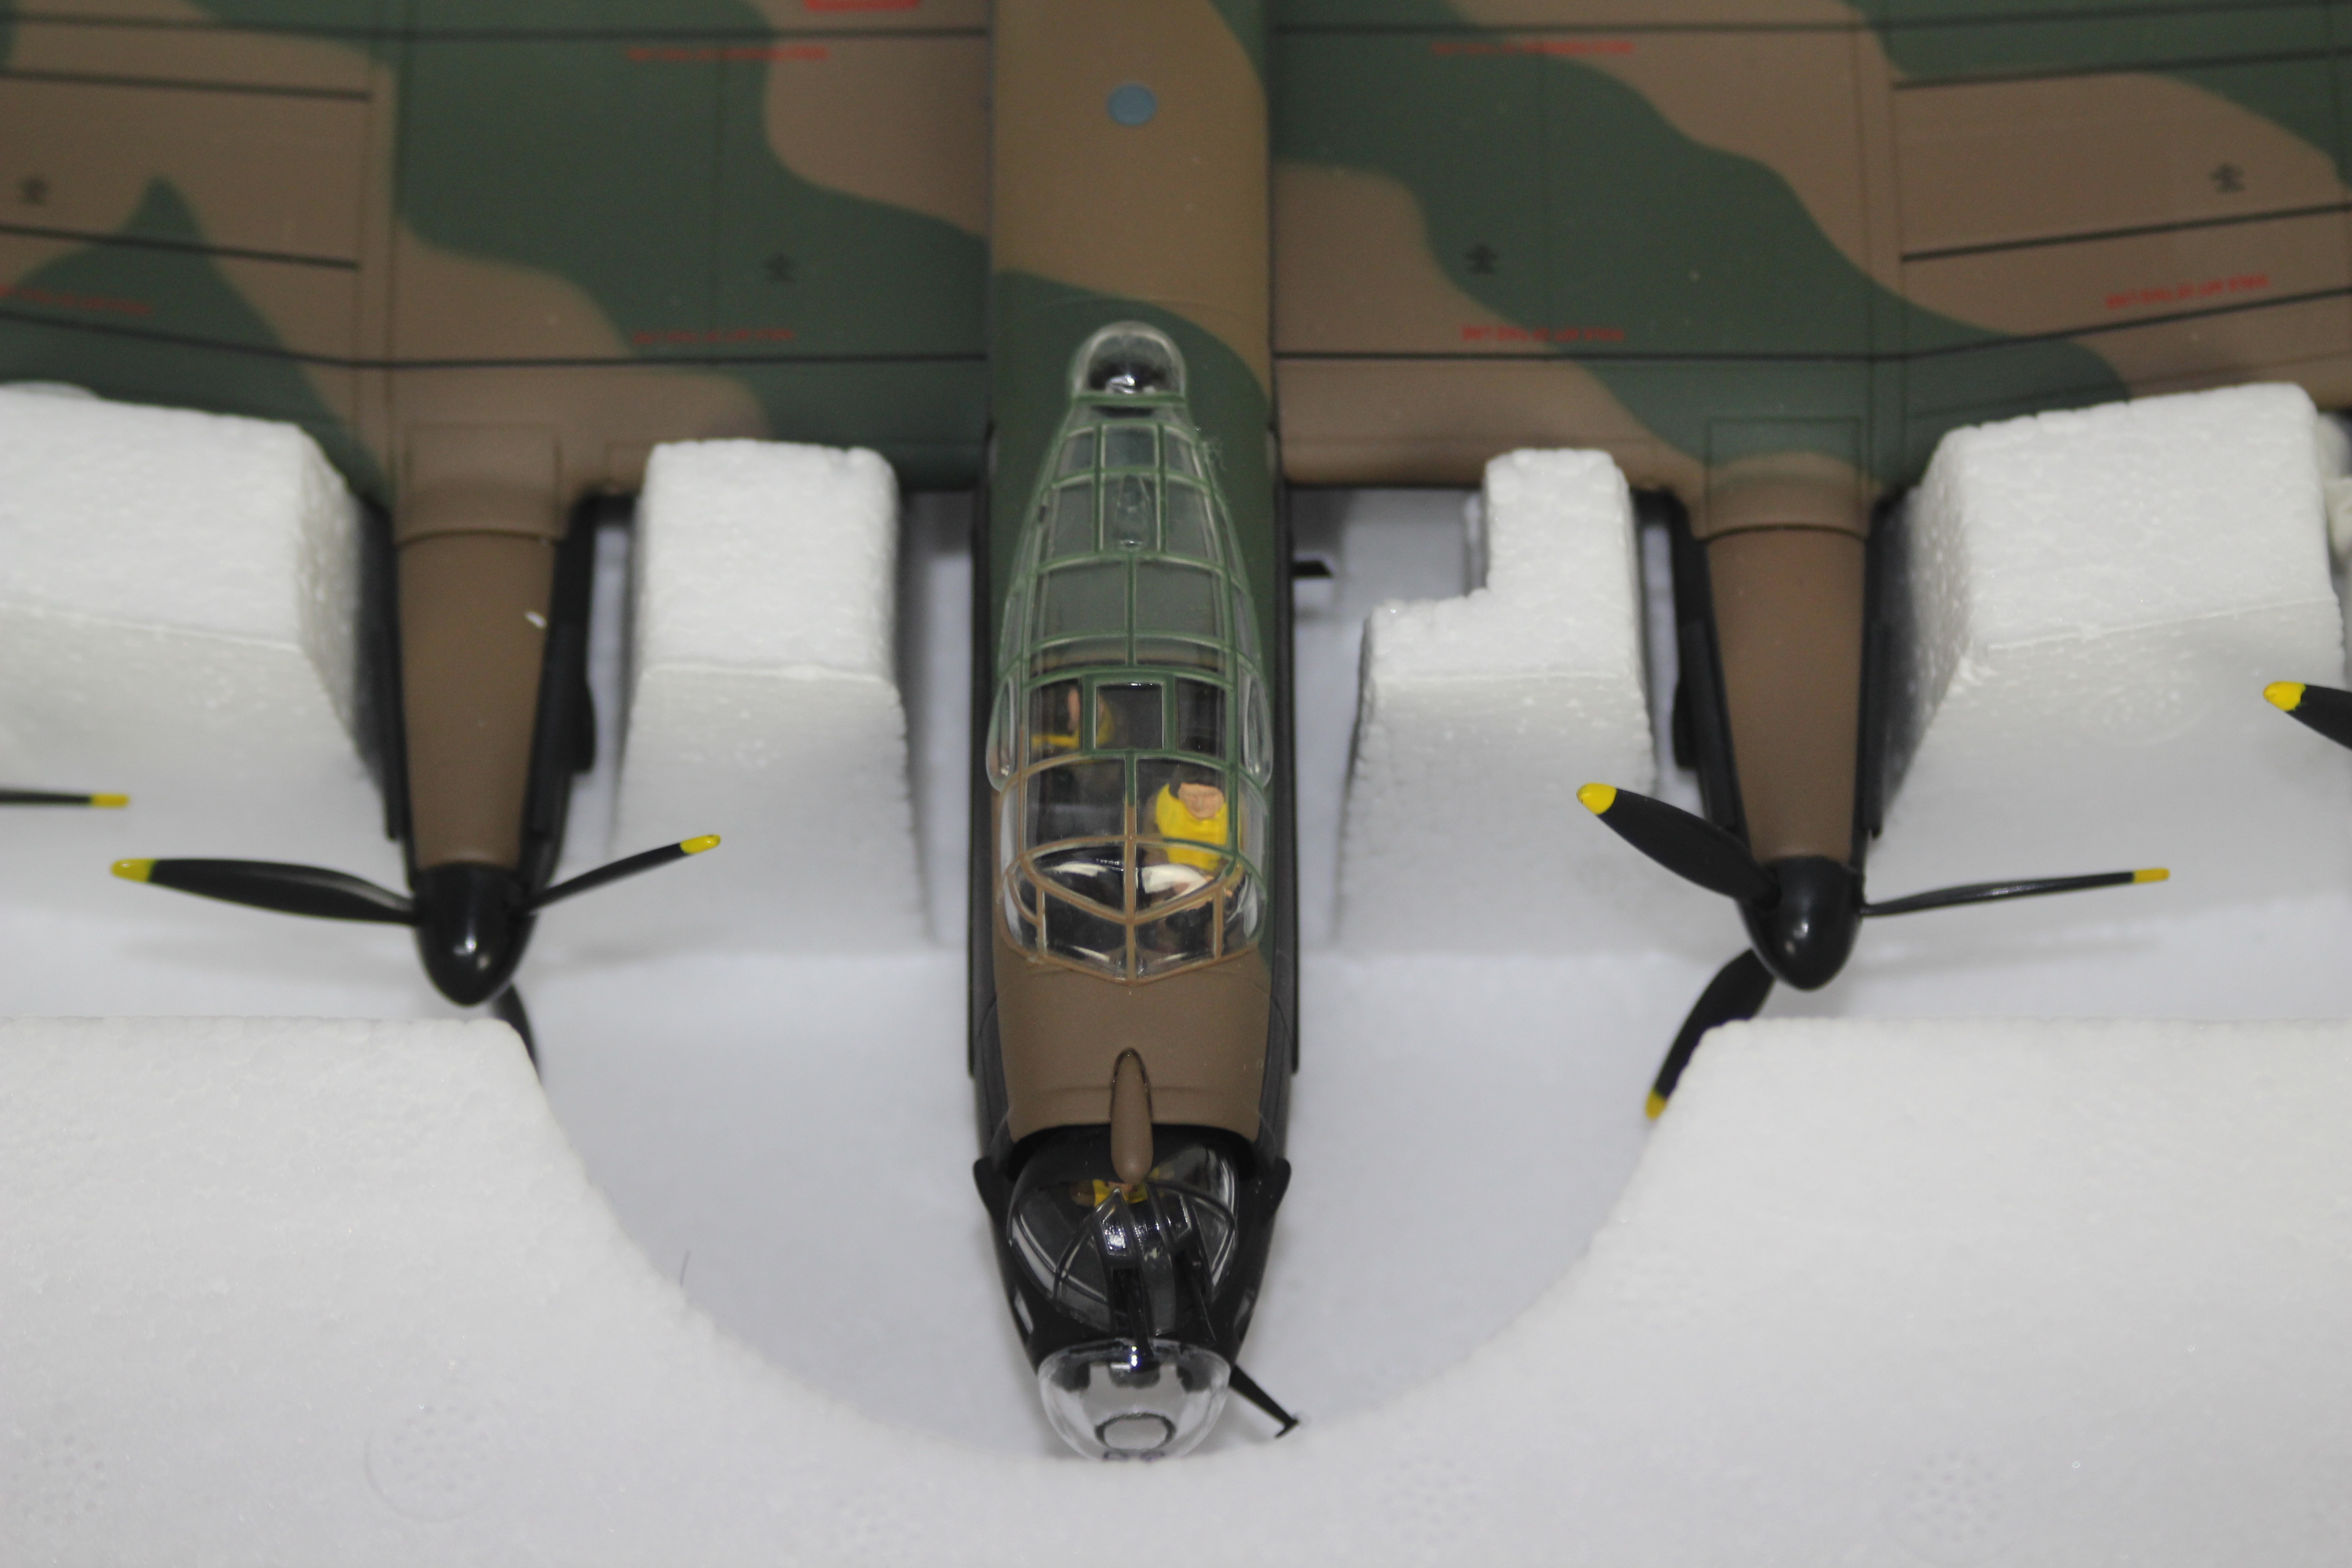 Corgi Aviation Archive - A boxed limited edition 1:72 scale AA32603 AVRO Lancaster R5508/KM-8 No. - Image 3 of 4